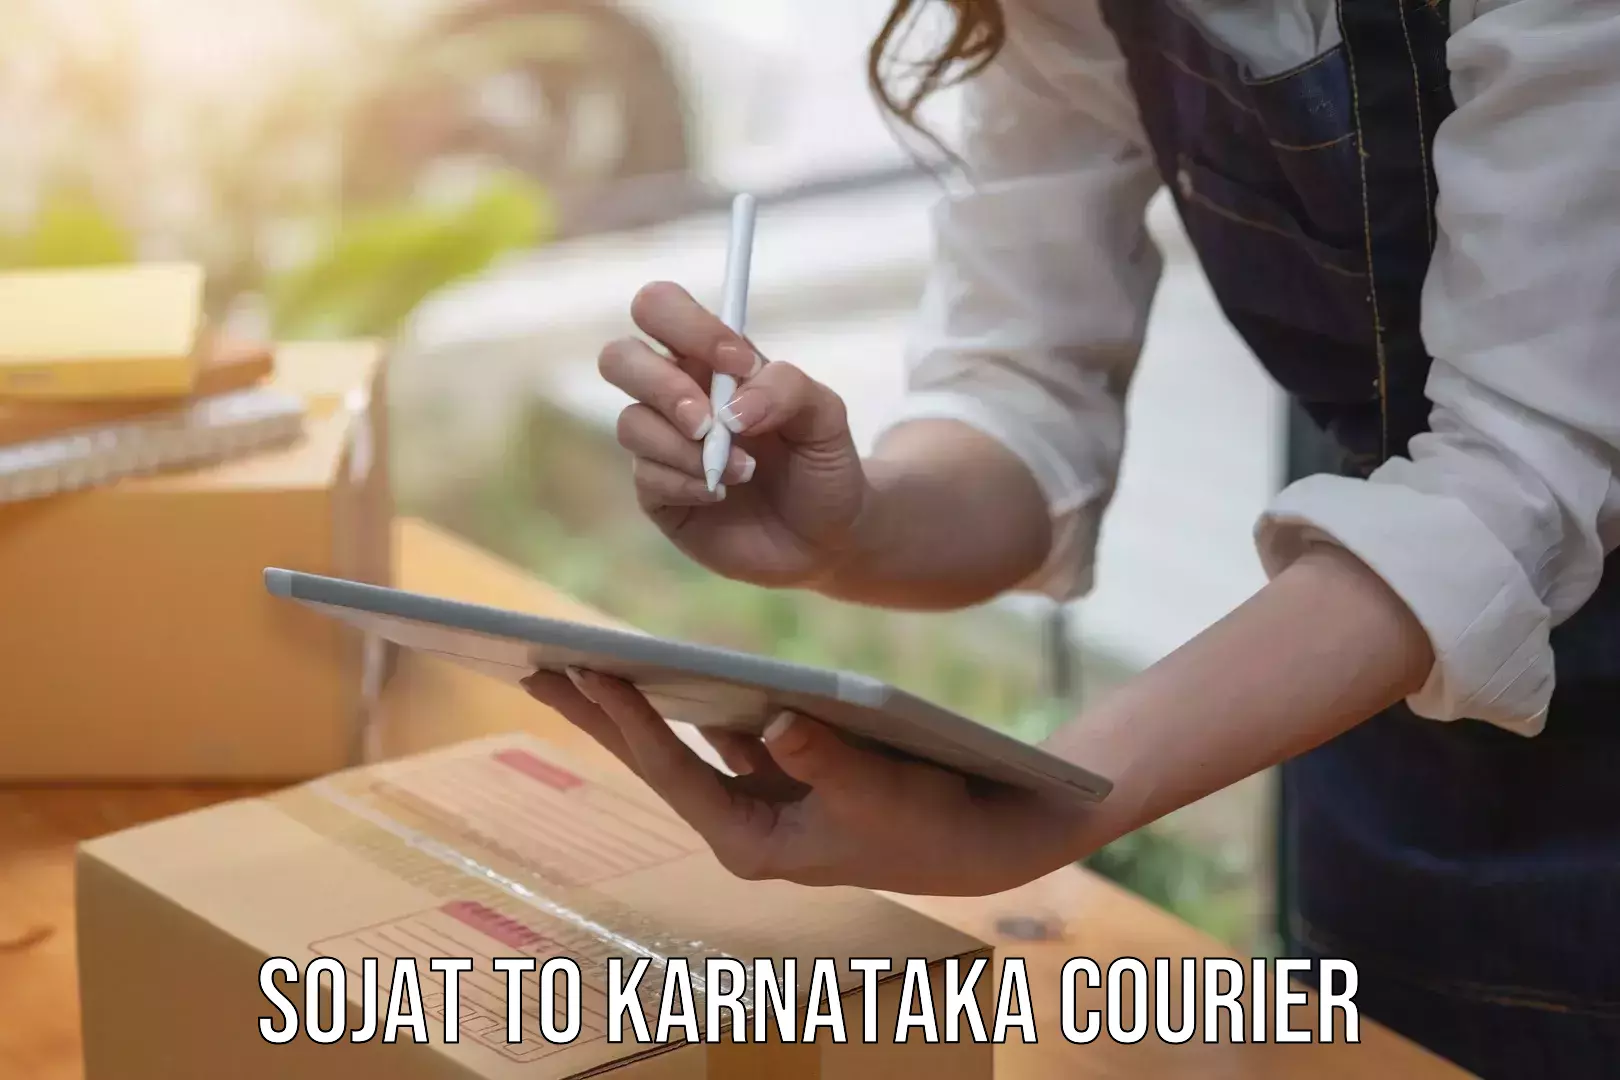 Global courier networks Sojat to Malur